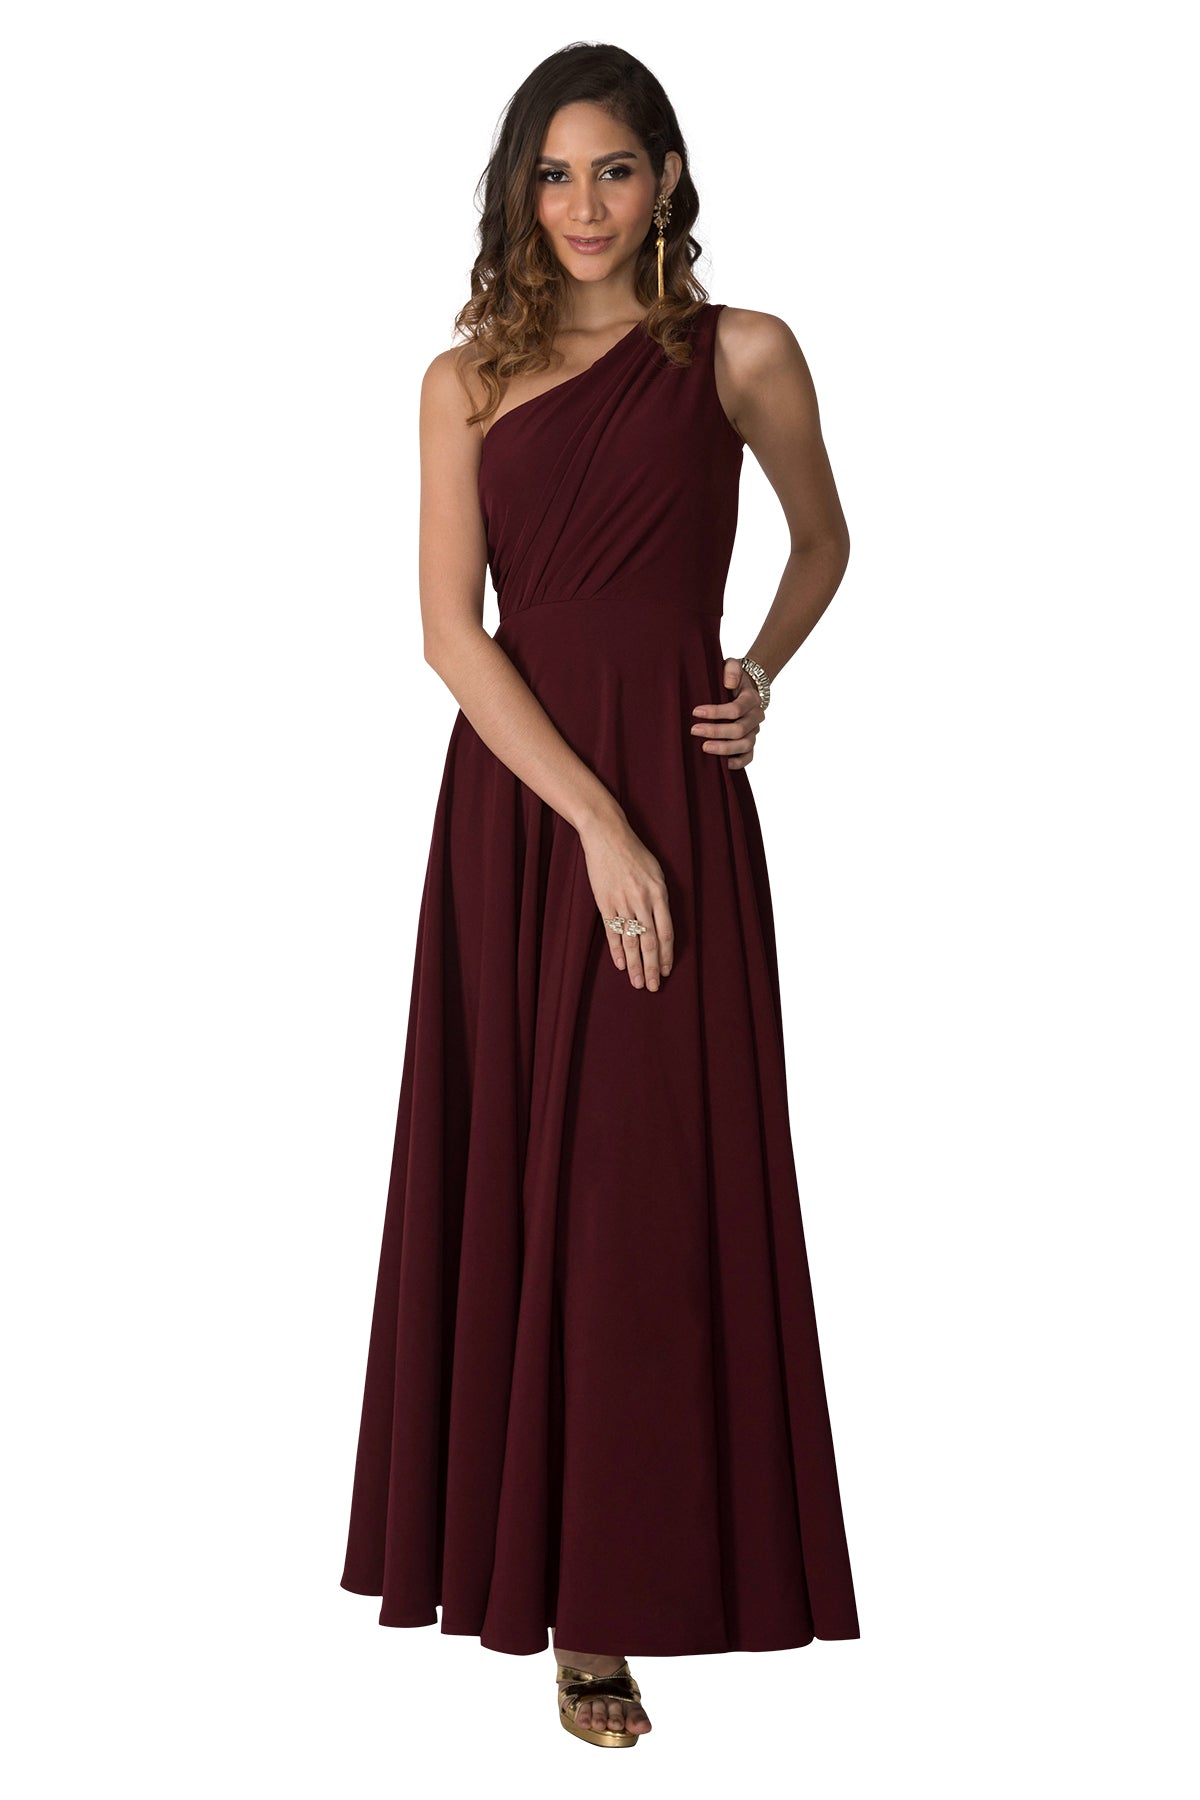 We've got the hots for this bold Burgundy gown with a double strapped back and pleated front in imported poly fabric.